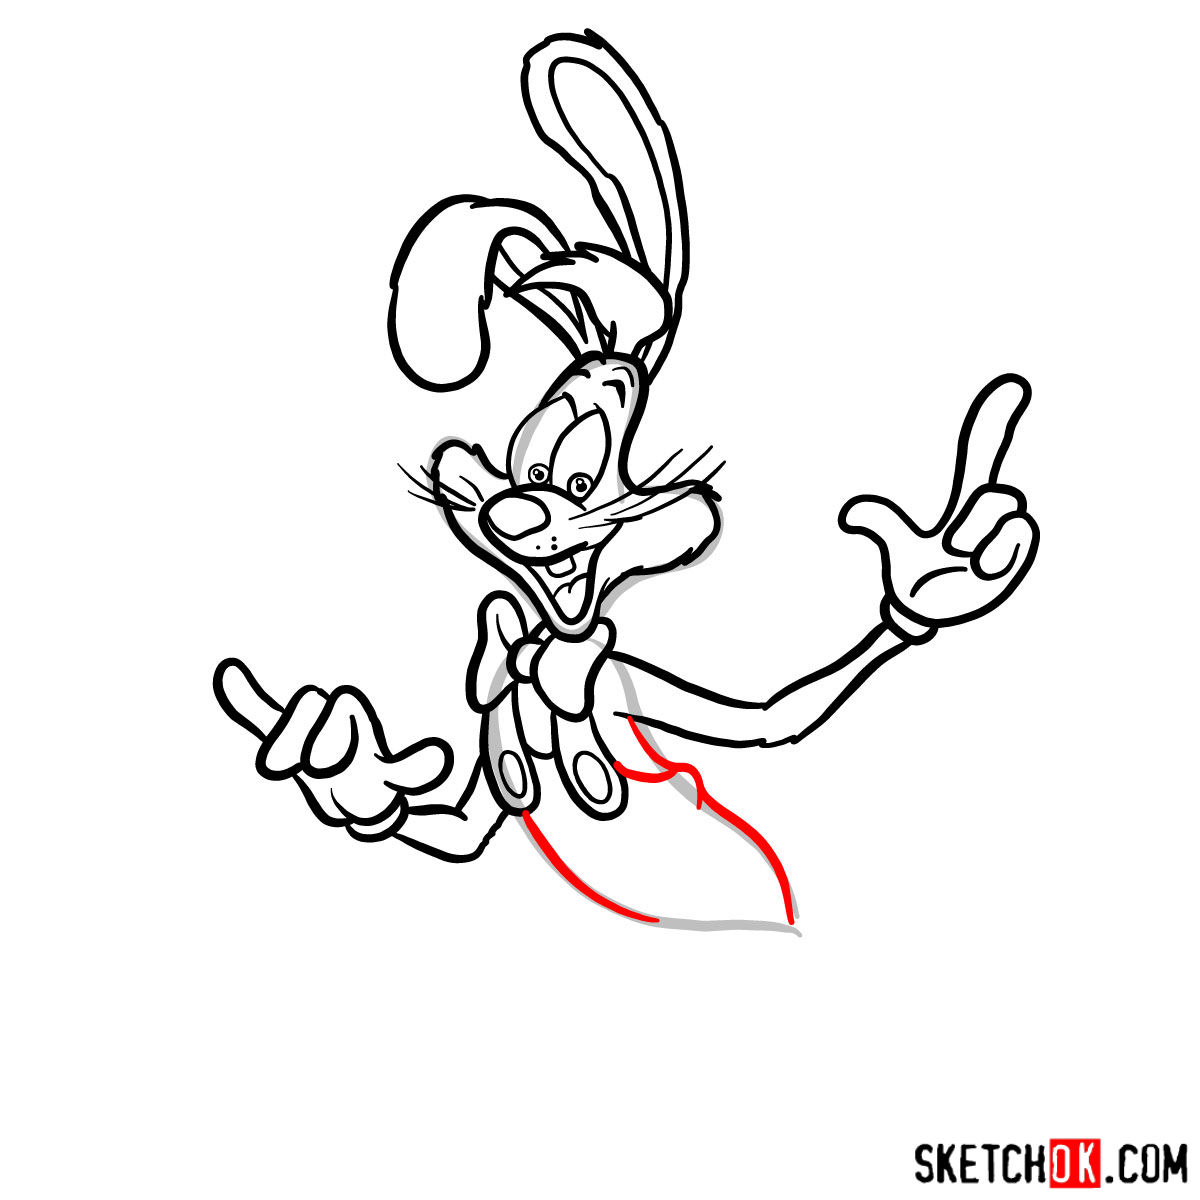 How to draw Roger Rabbit - step 10